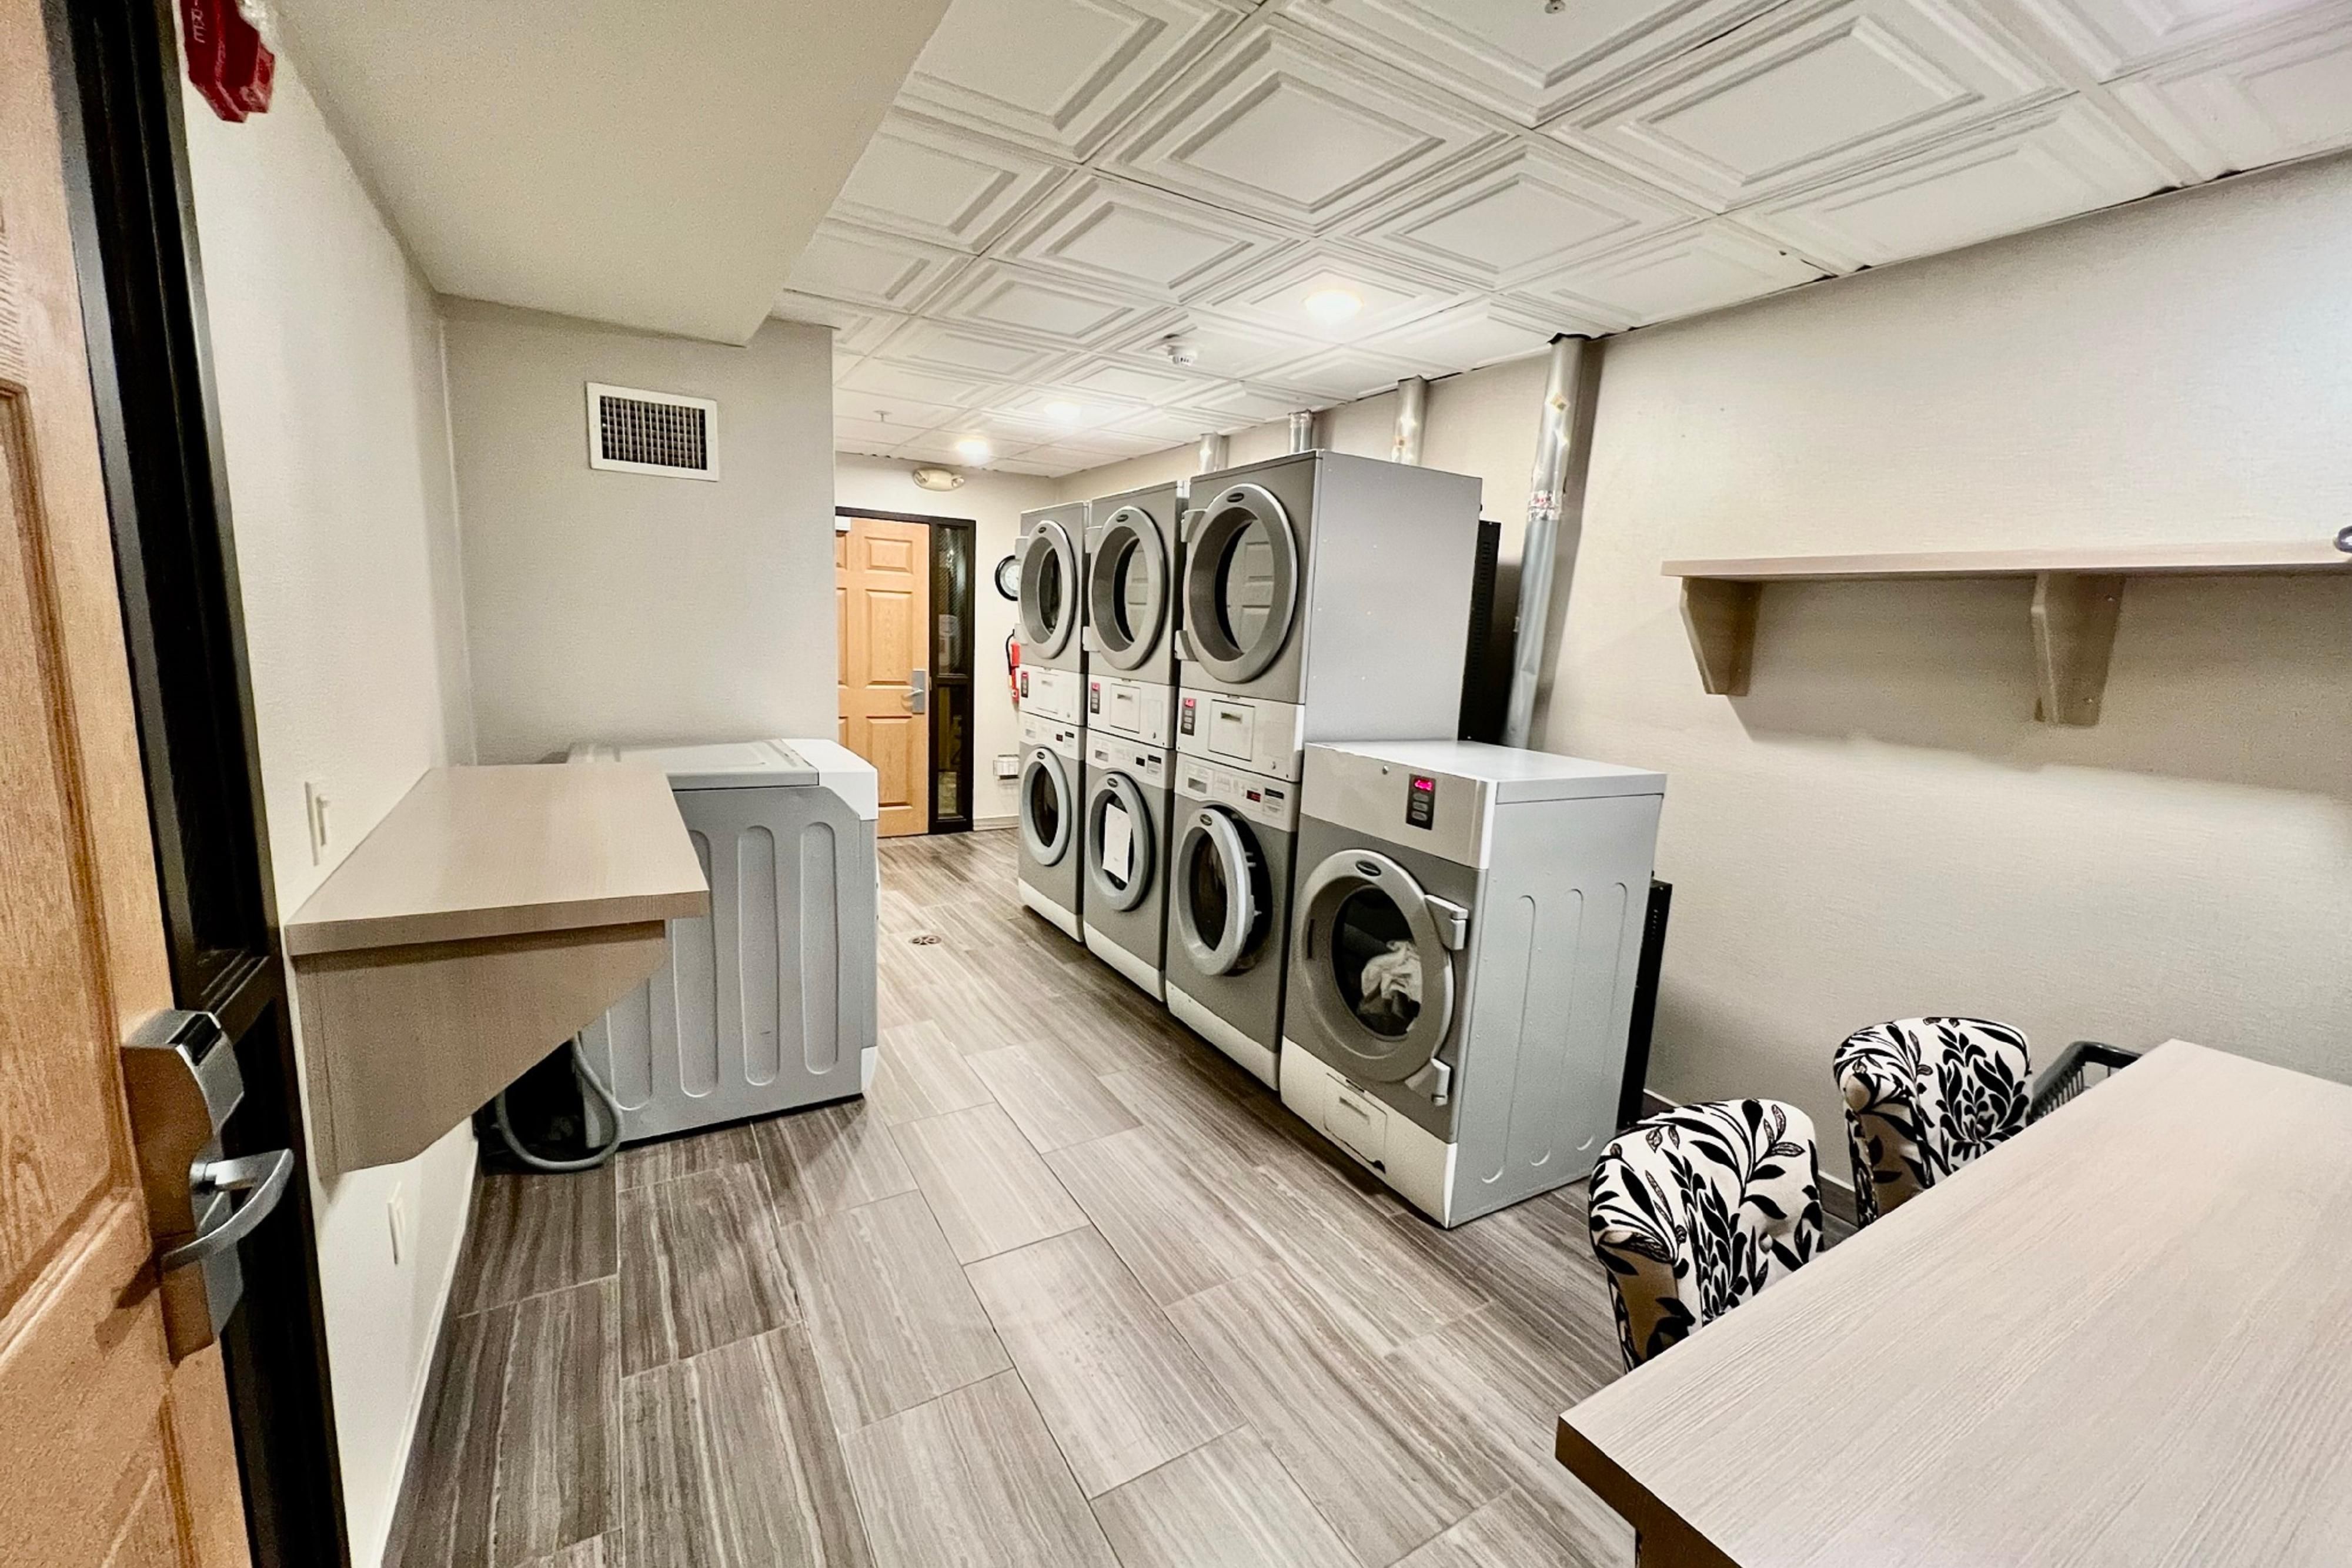 Guests staying at our hotel enjoy free use of our guest laundry room. Just bring your own high efficiency detergent and wash away. No coins needed here. 